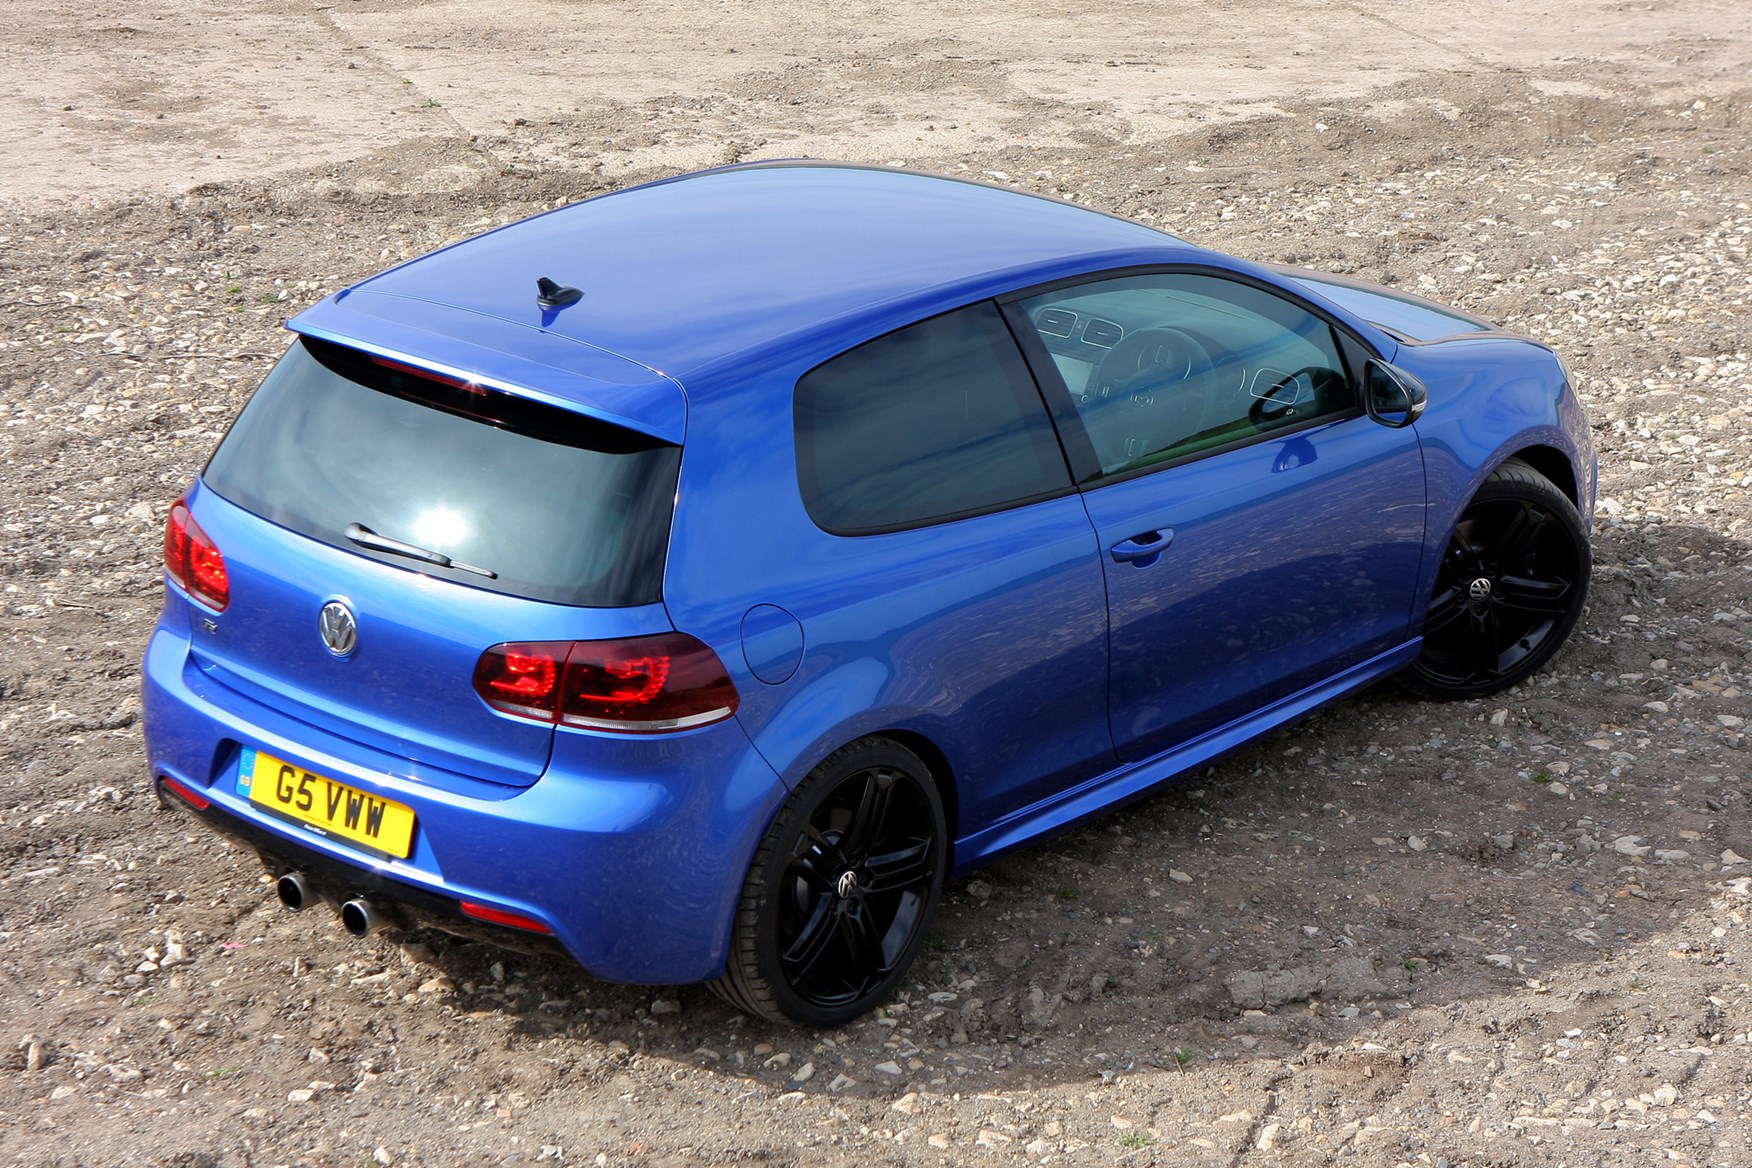 Volkswagen Golf R (2010) review, rear view